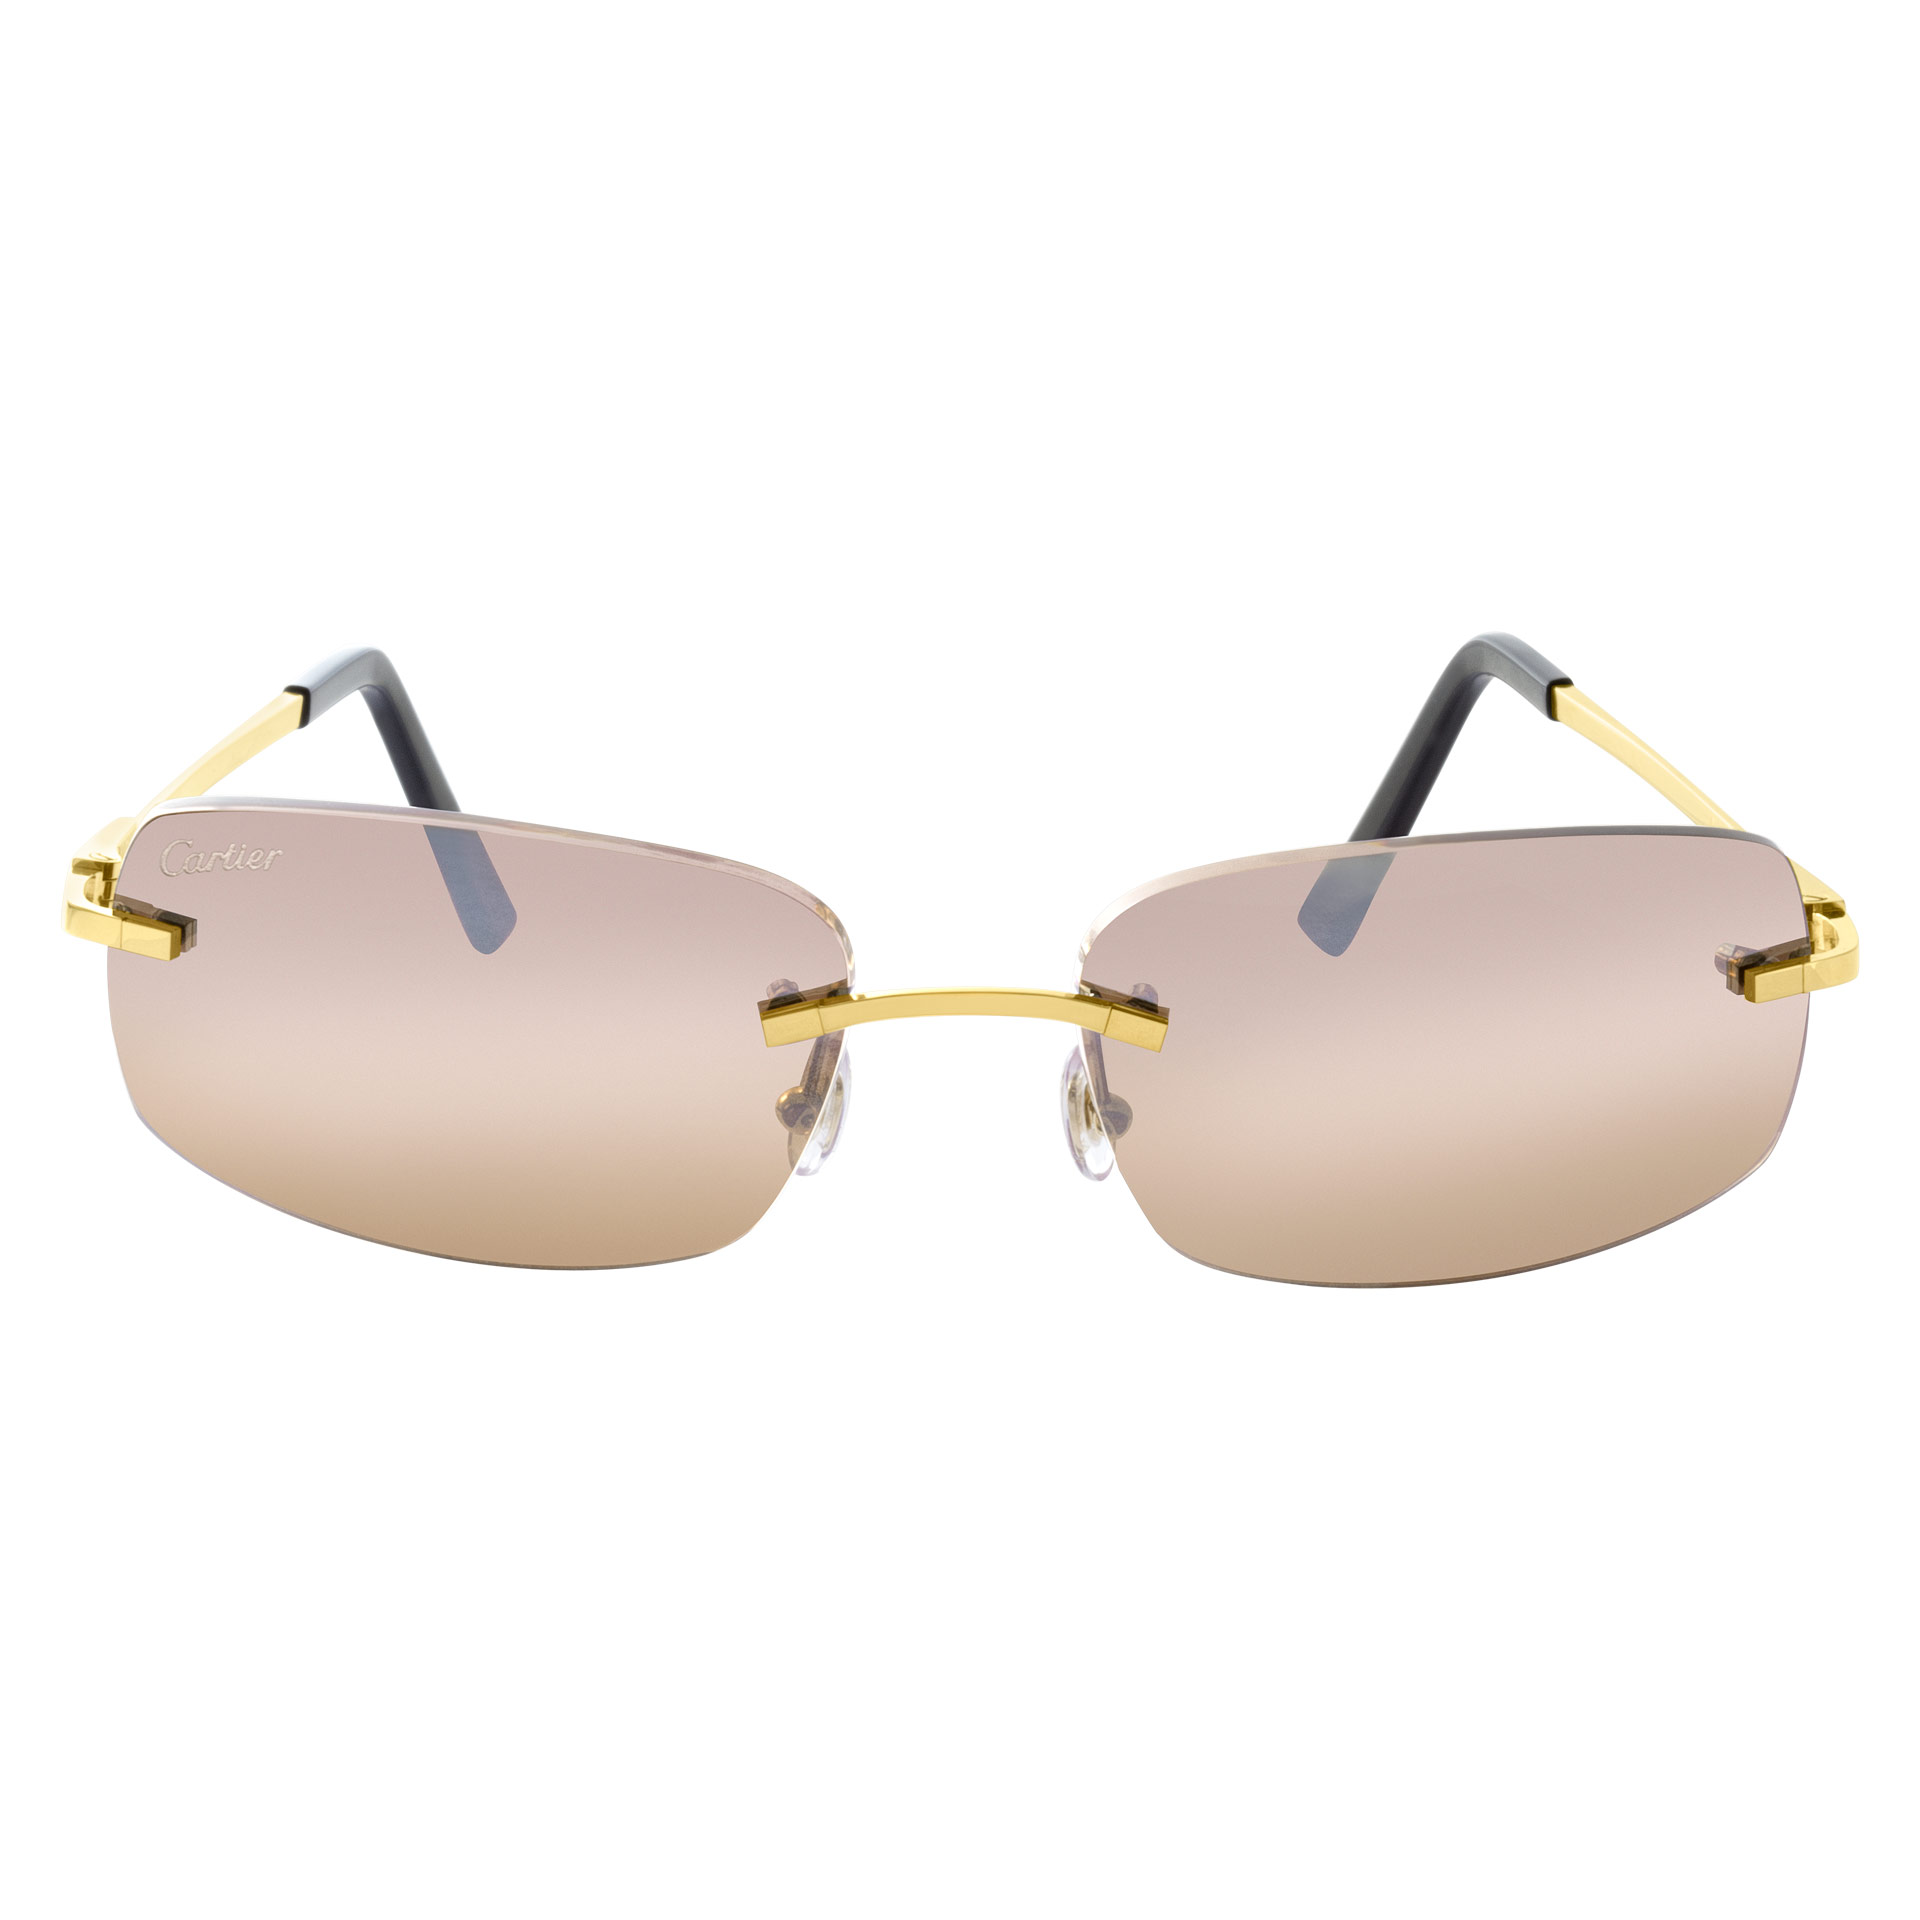 Cartier glasses in 18k gold plated frame with diamond accent at the temple image 1